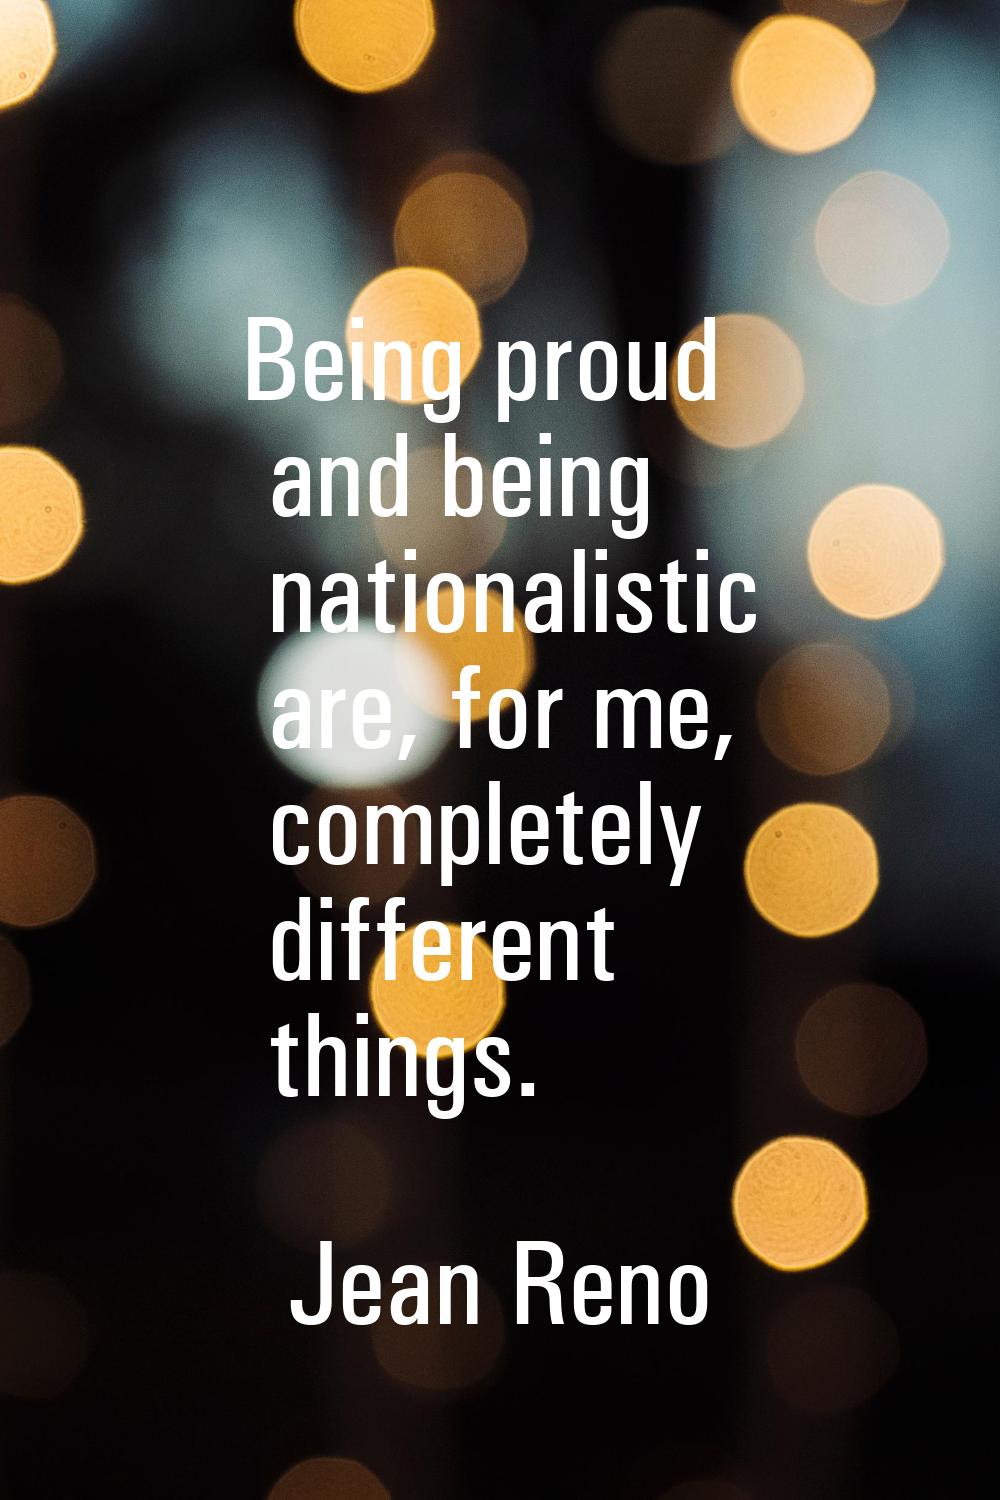 Being proud and being nationalistic are, for me, completely different things.